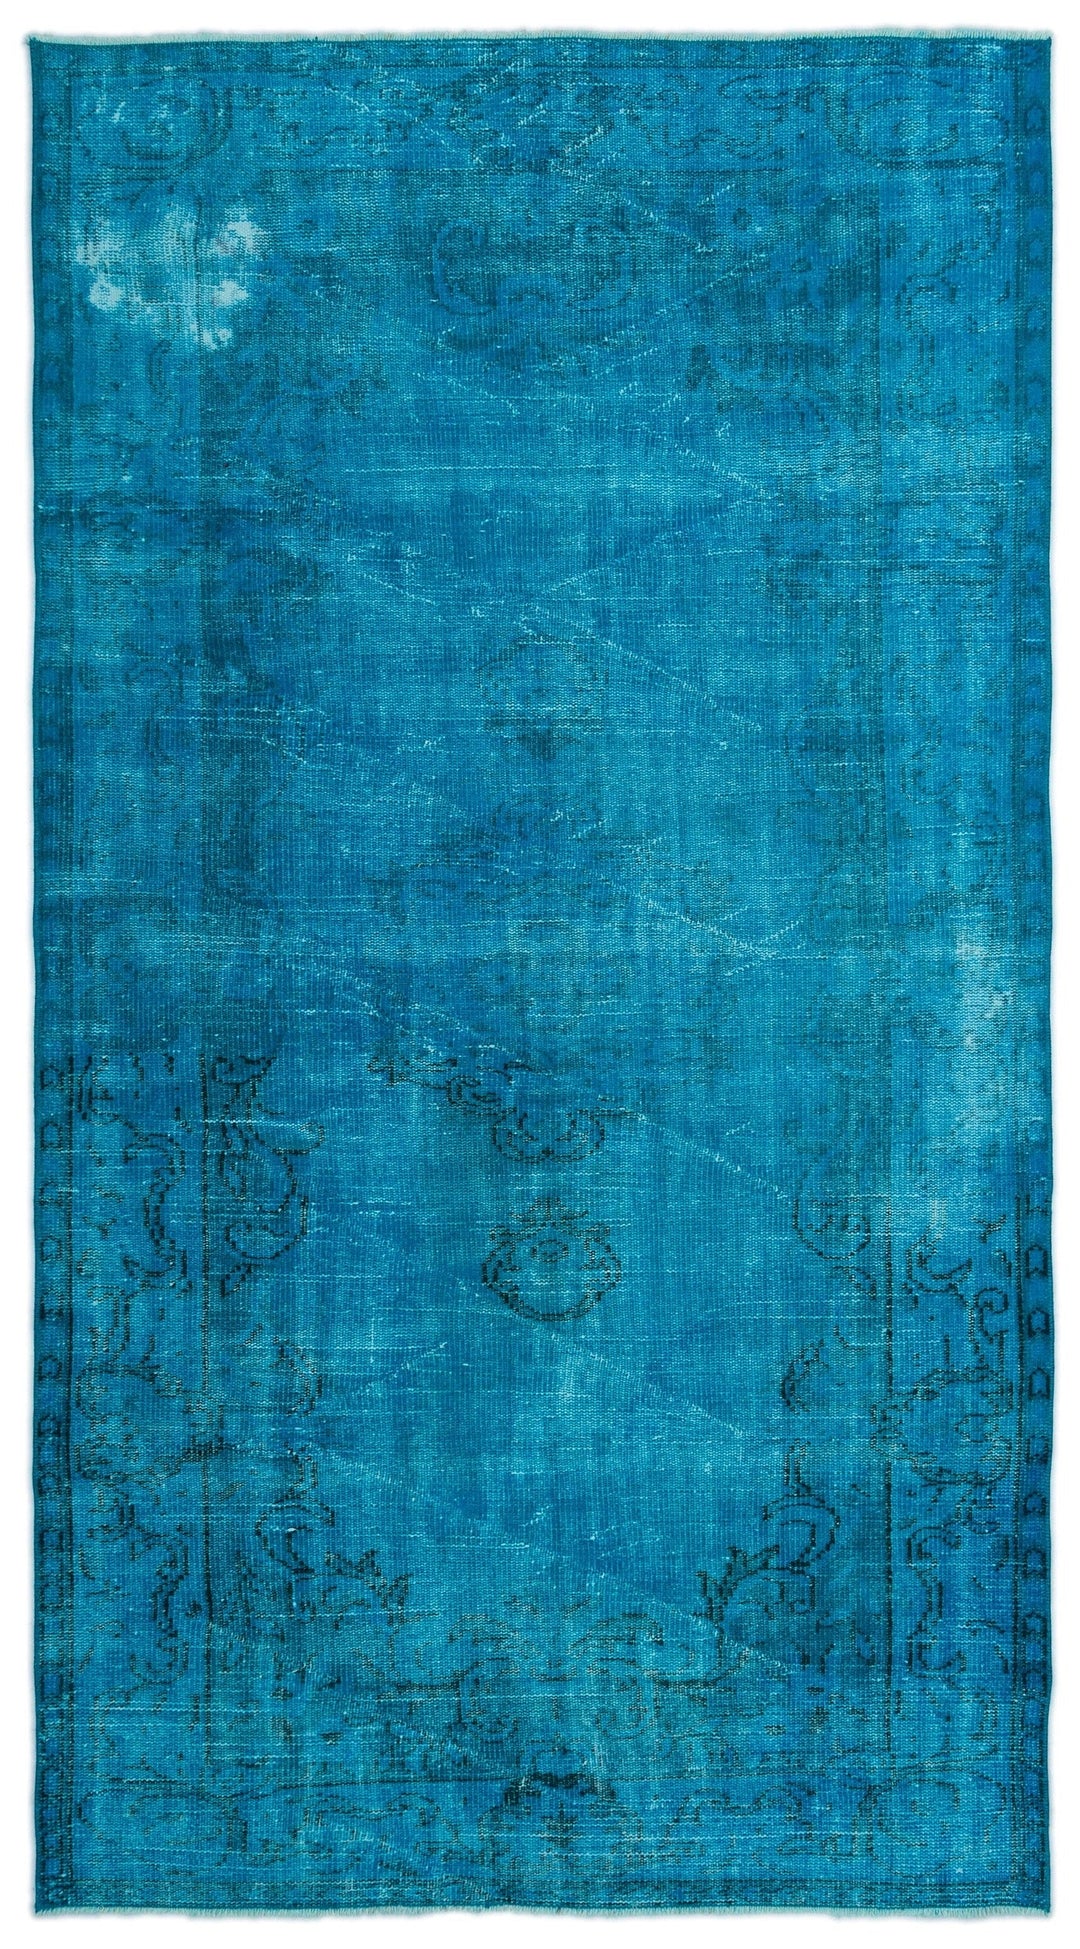 Athens Turquoise Tumbled Wool Hand Woven Carpet 145 x 265